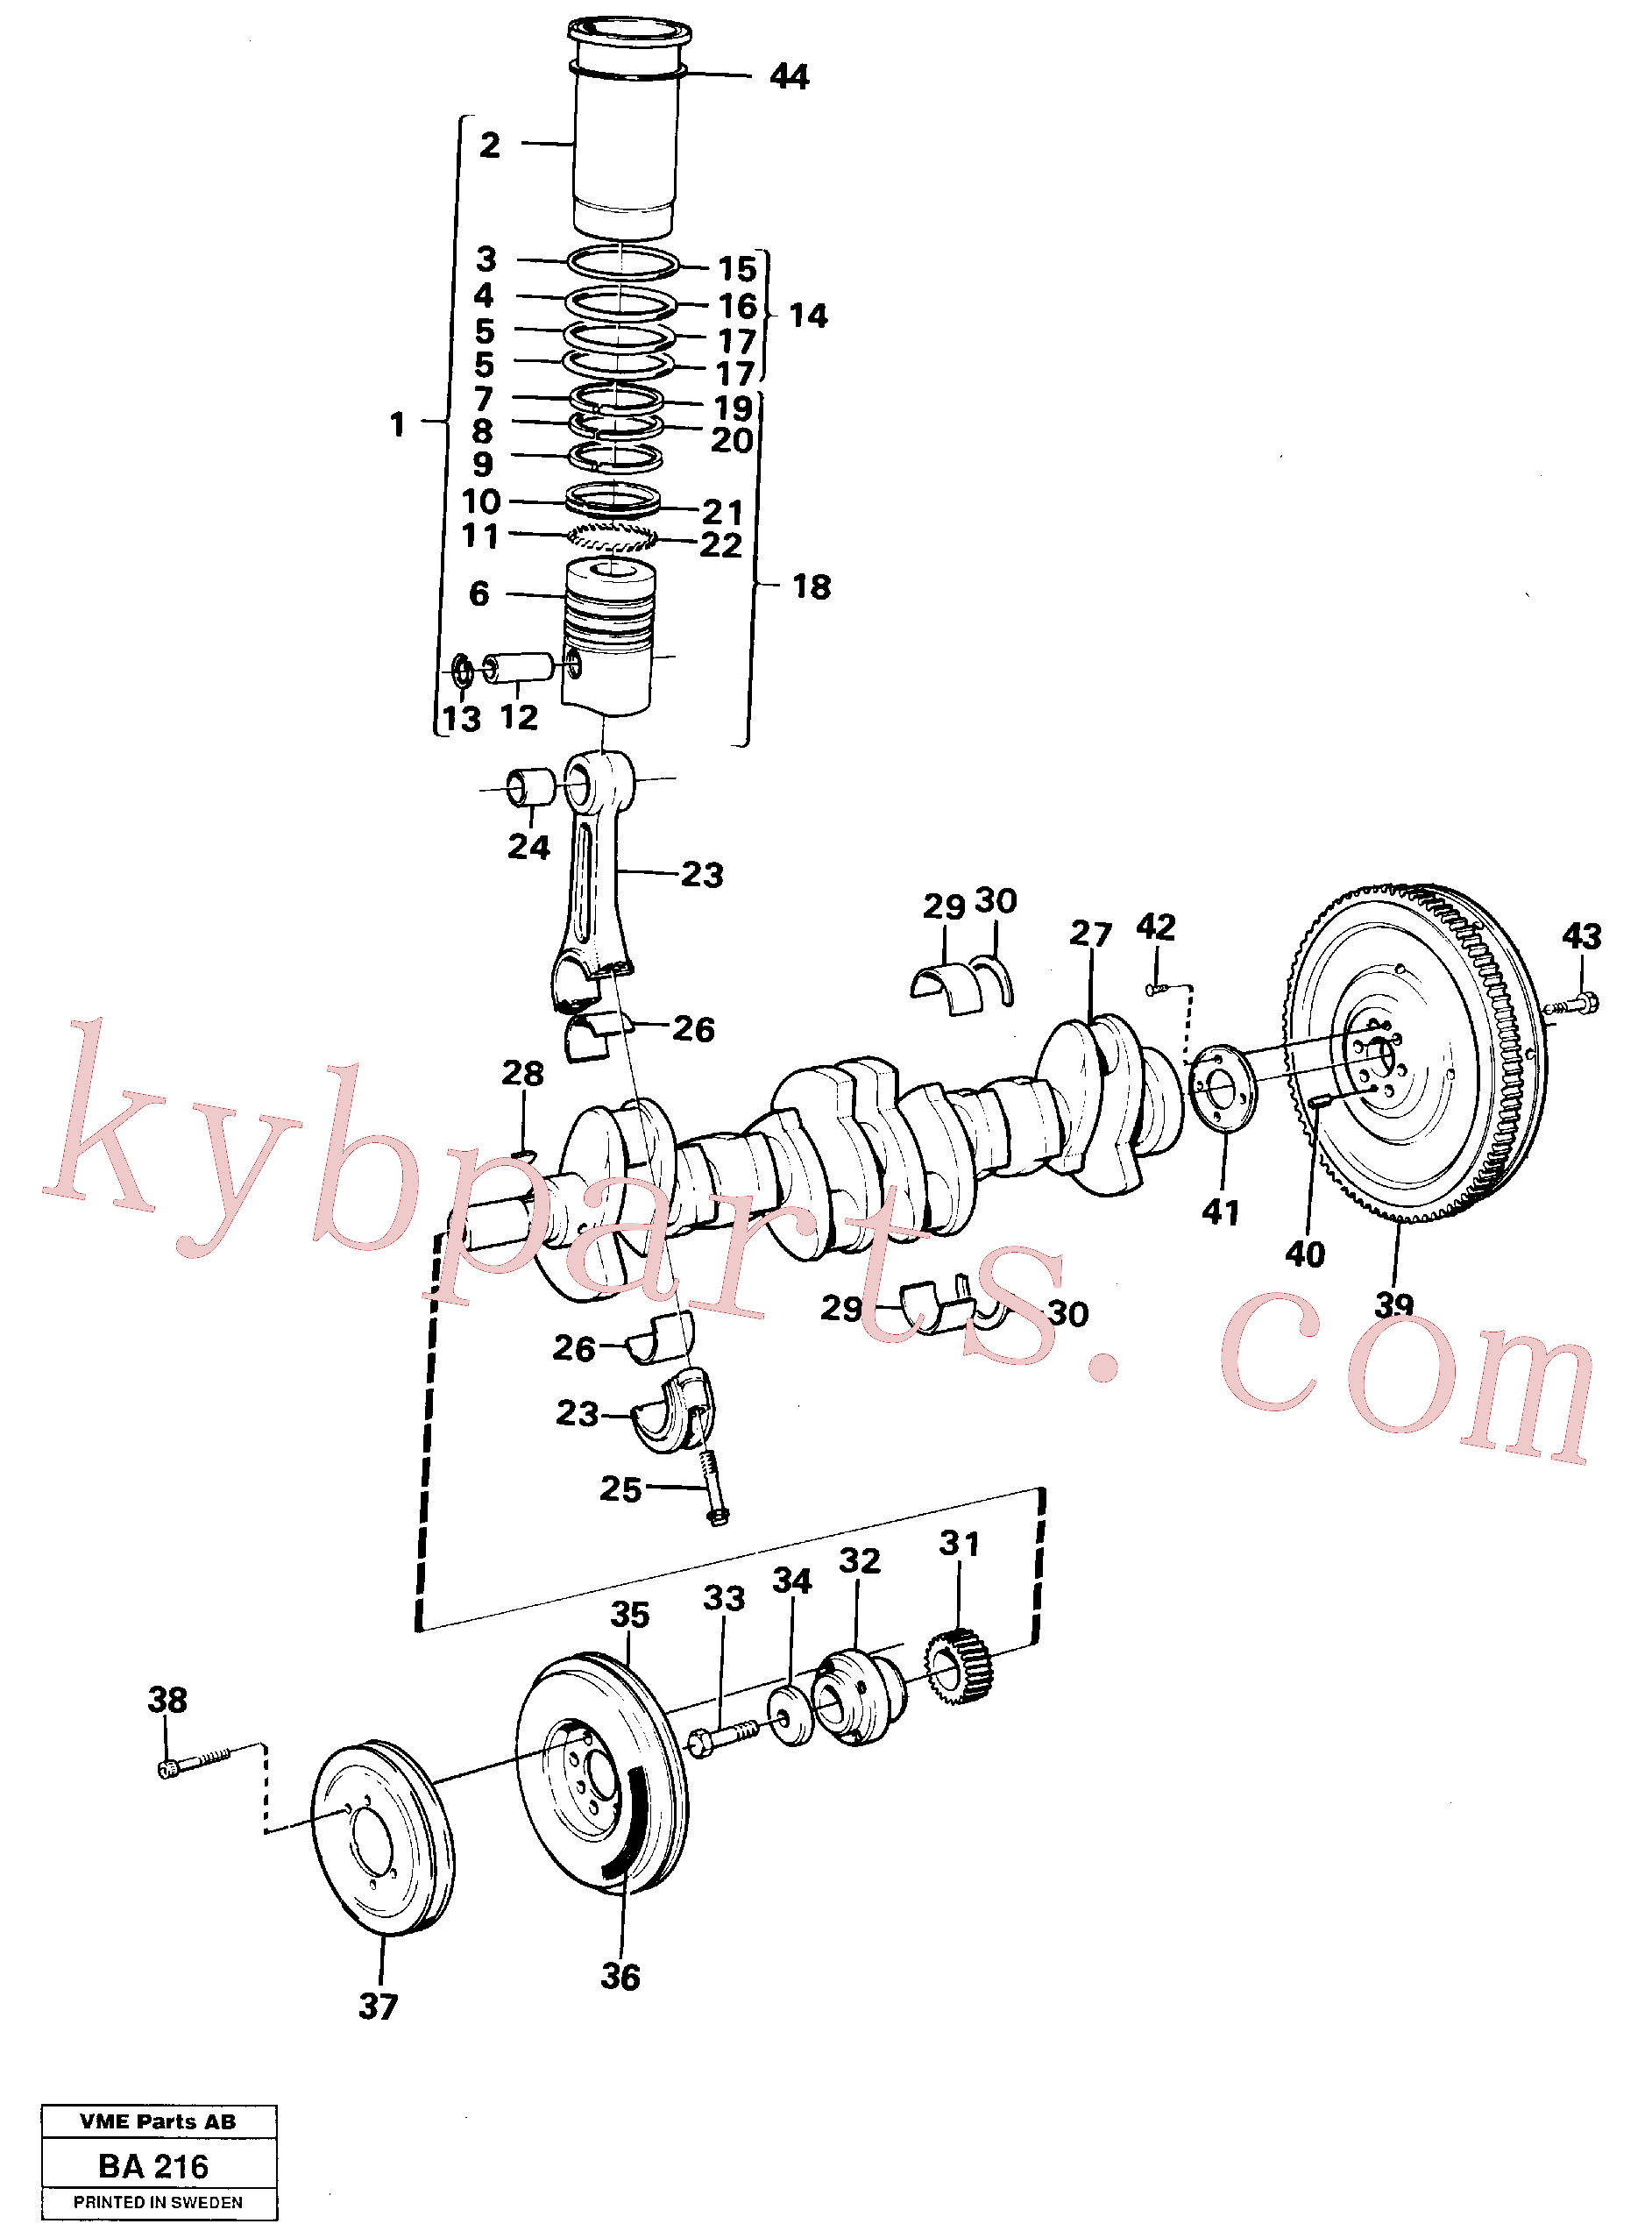 VOE950681 for Volvo Crankshaft and related parts(BA216 assembly)